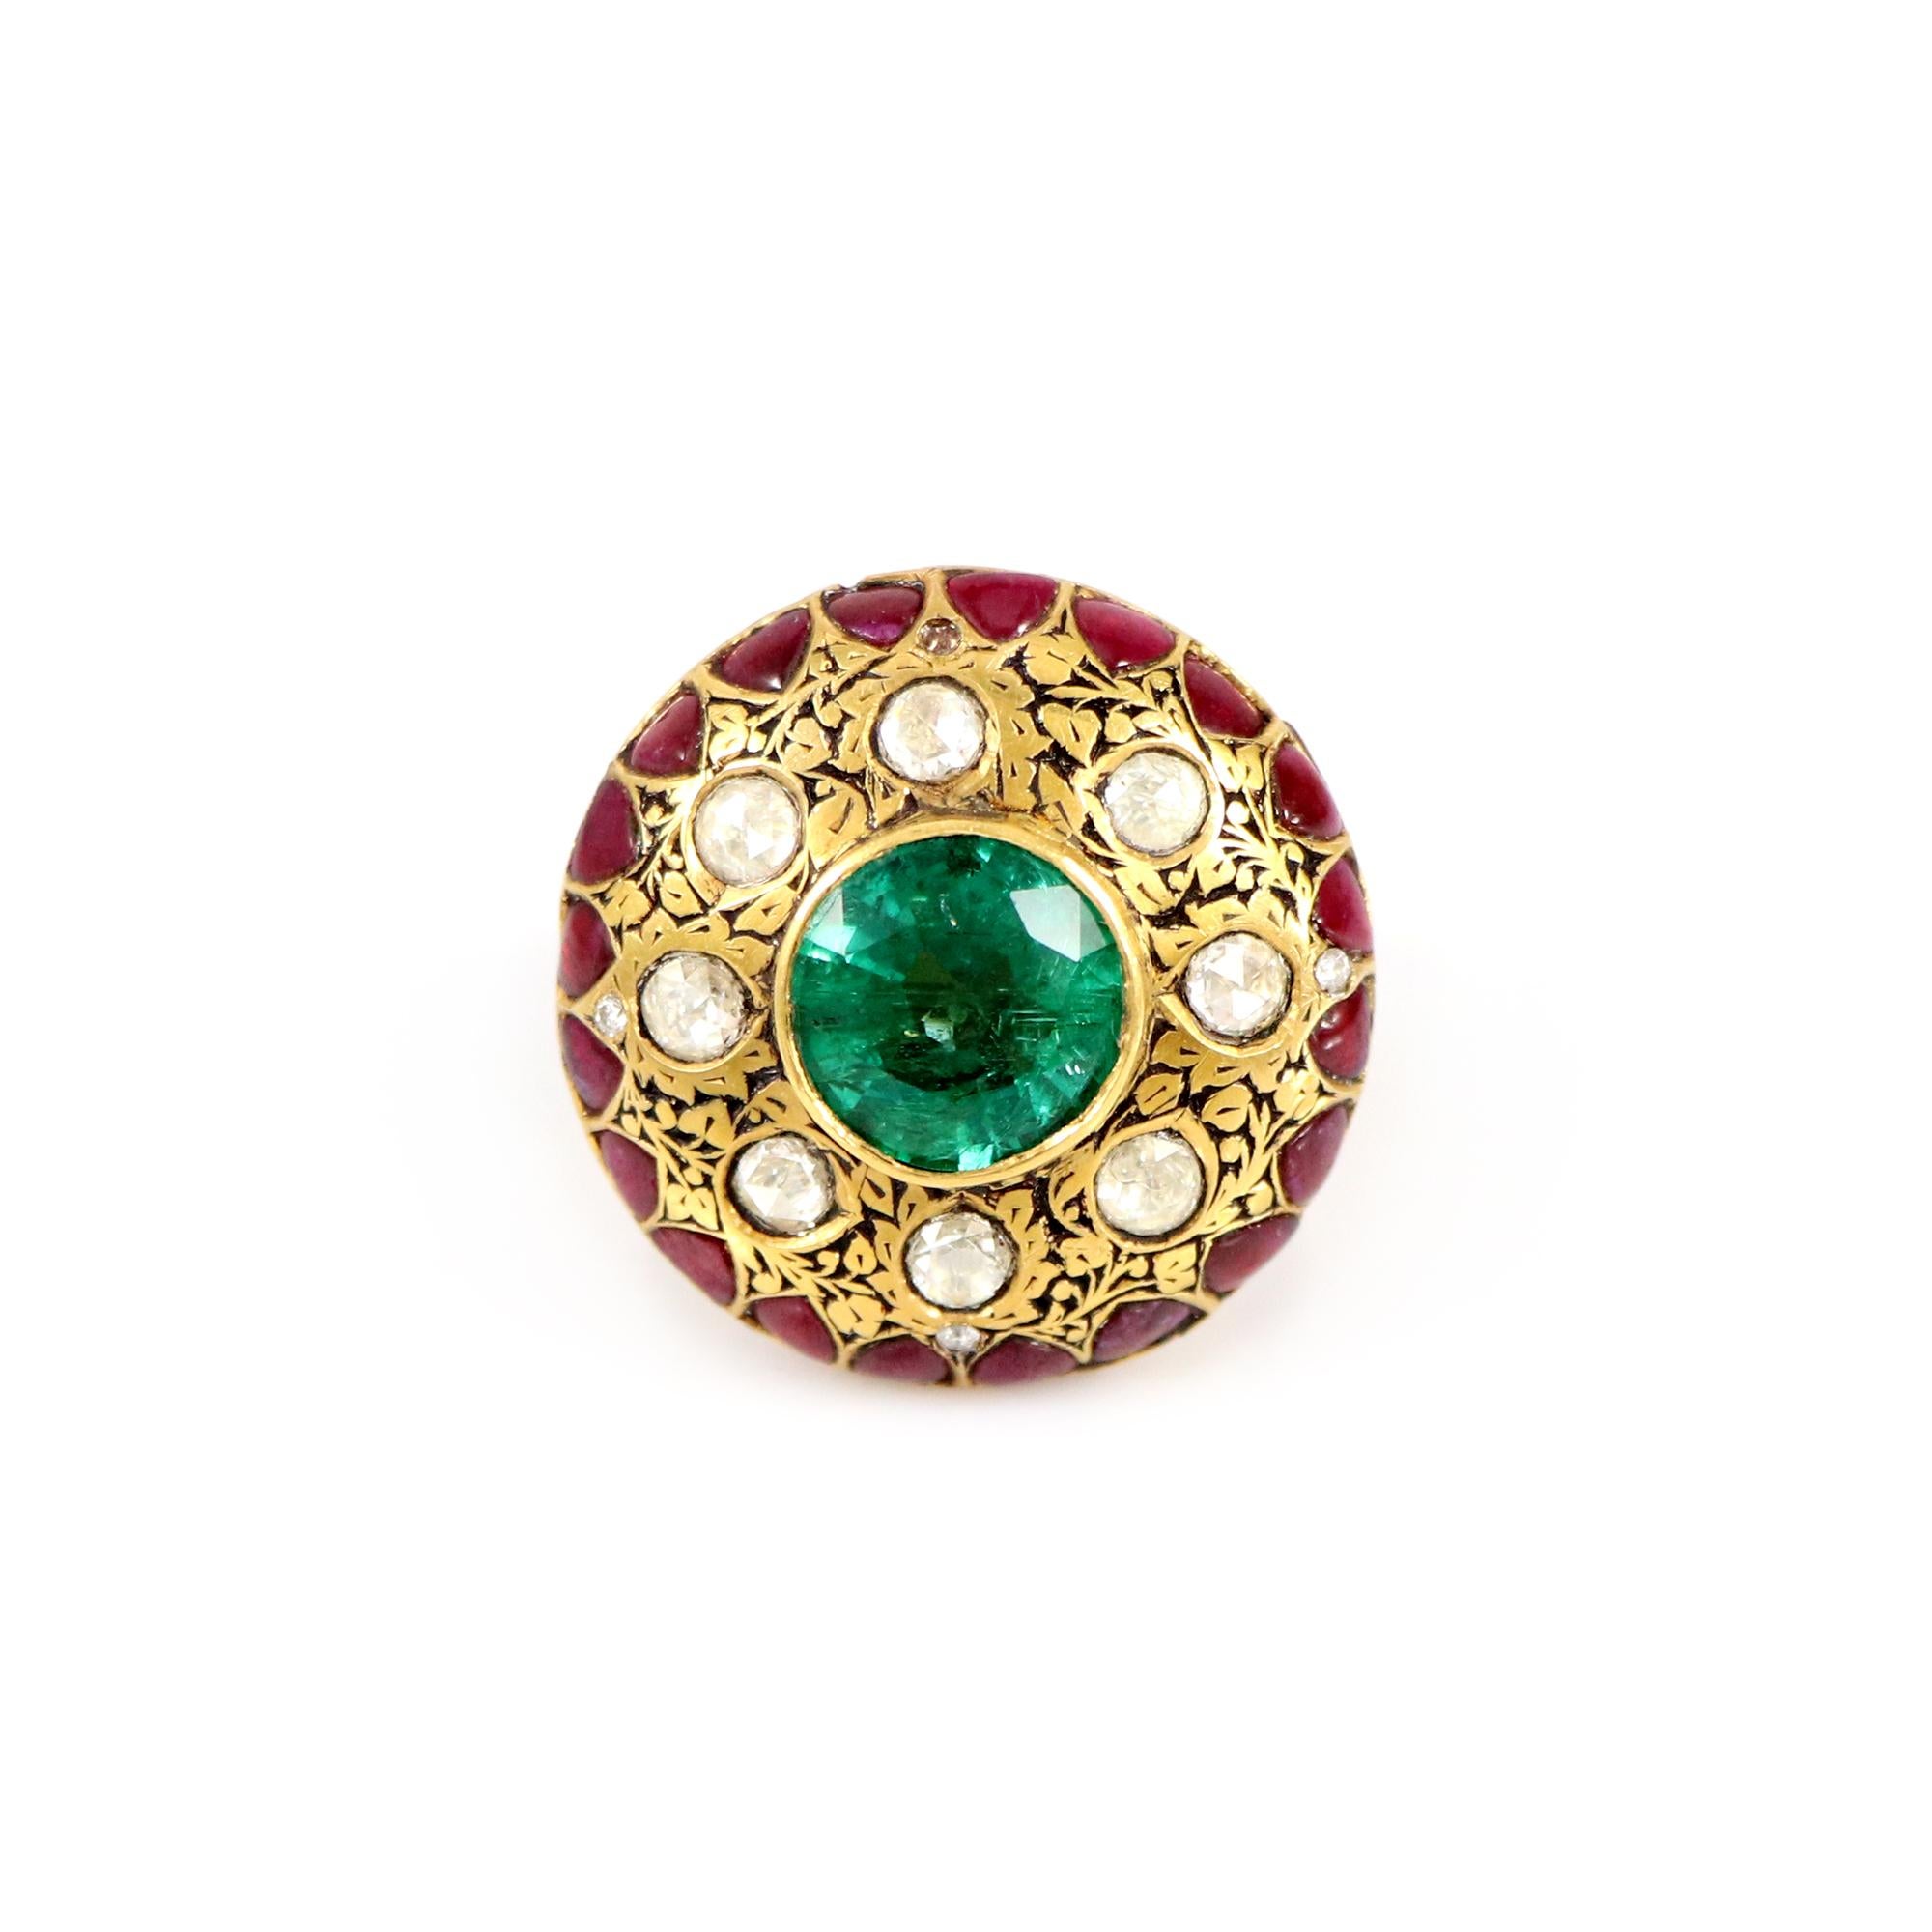 Introducing our exquisite traditional ring, a masterpiece crafted in luxurious 22K gold. At its heart lies a captivating emerald, radiating an aura of elegance and grace that truly enchants. To enhance its beauty and add a touch of opulence, vibrant